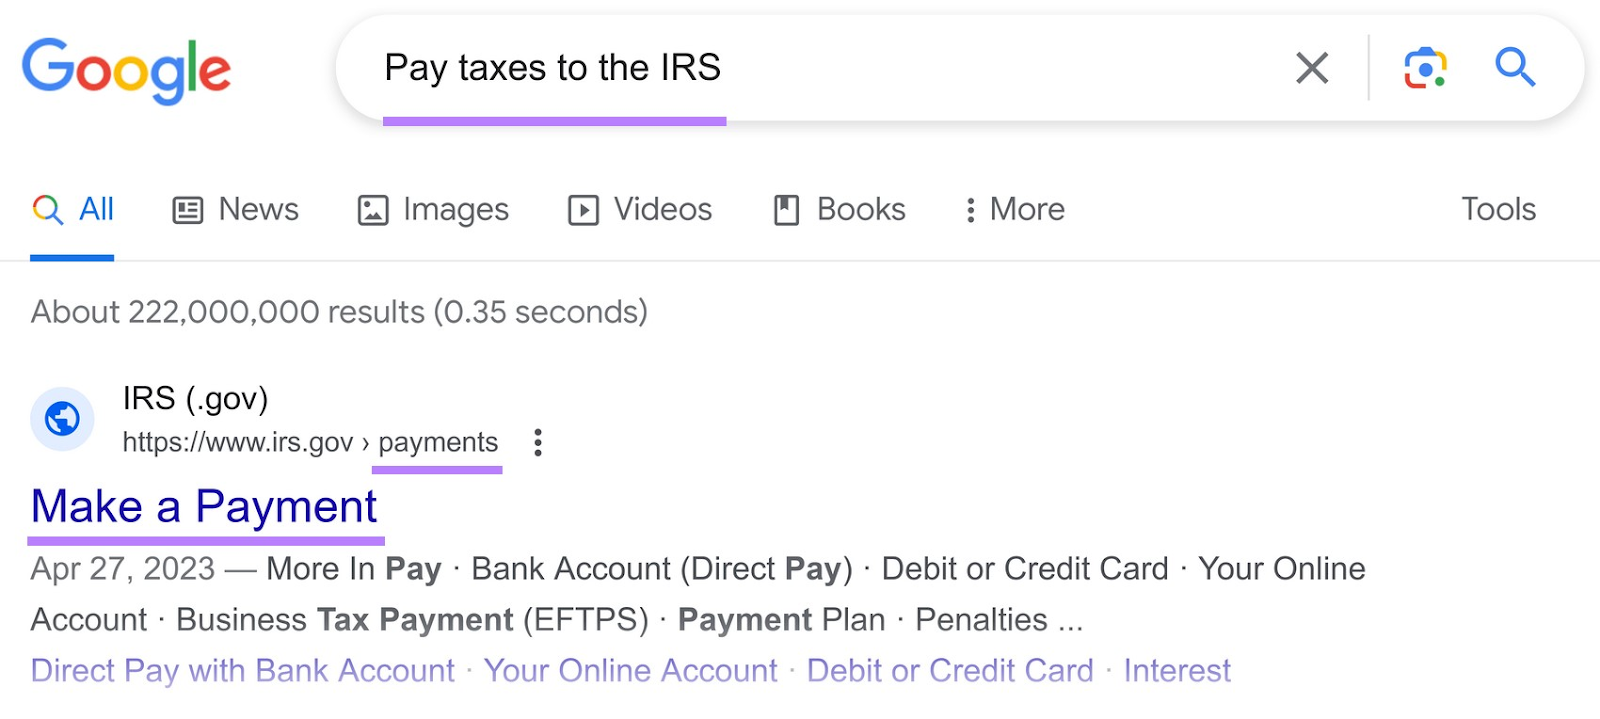 Google search for "pay taxes to the IRS"